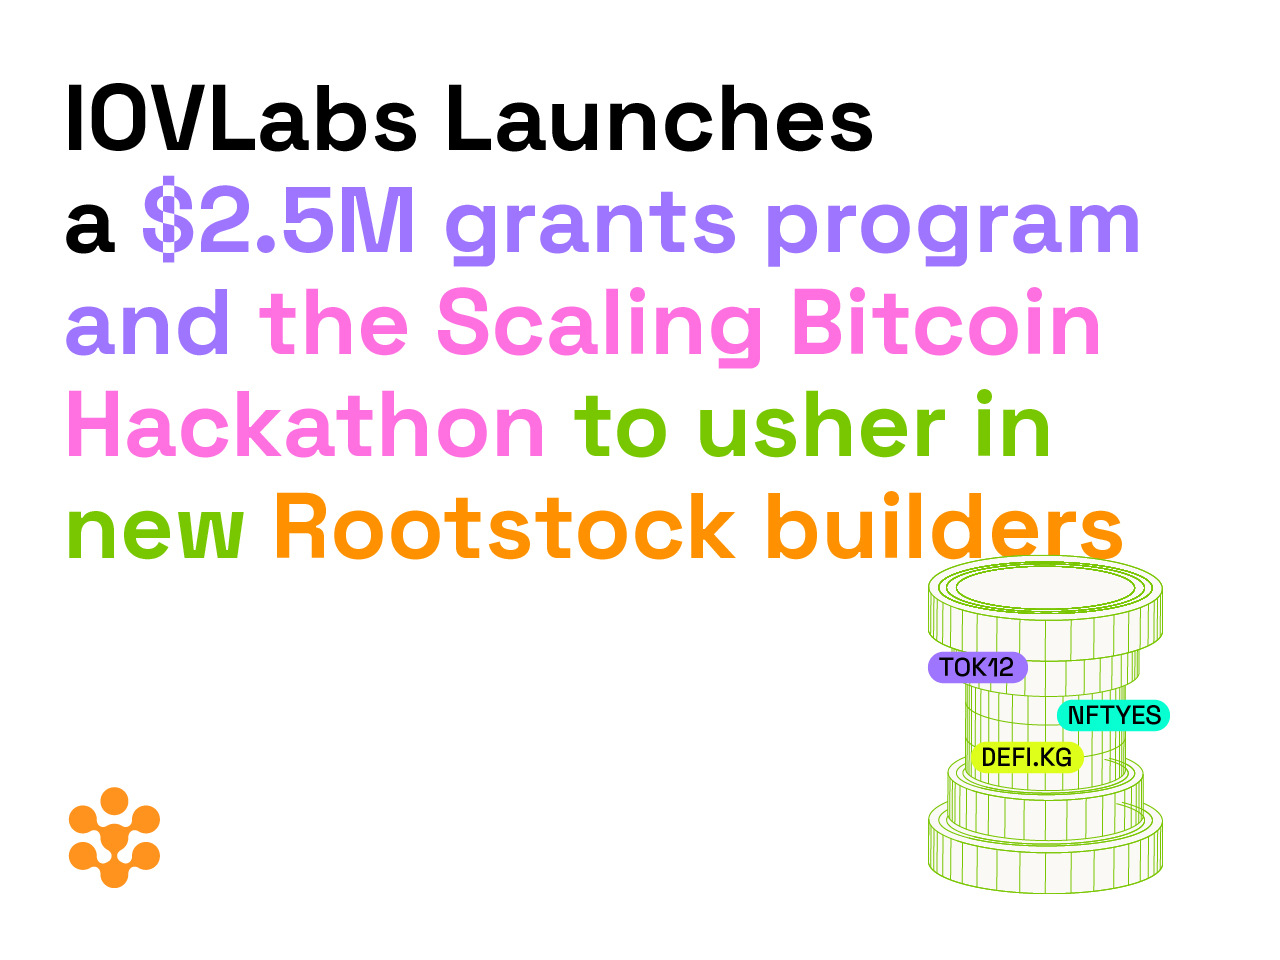 IOVLabs Introduces $2.5M Grant Program and Scaling Bitcoin Hackathon